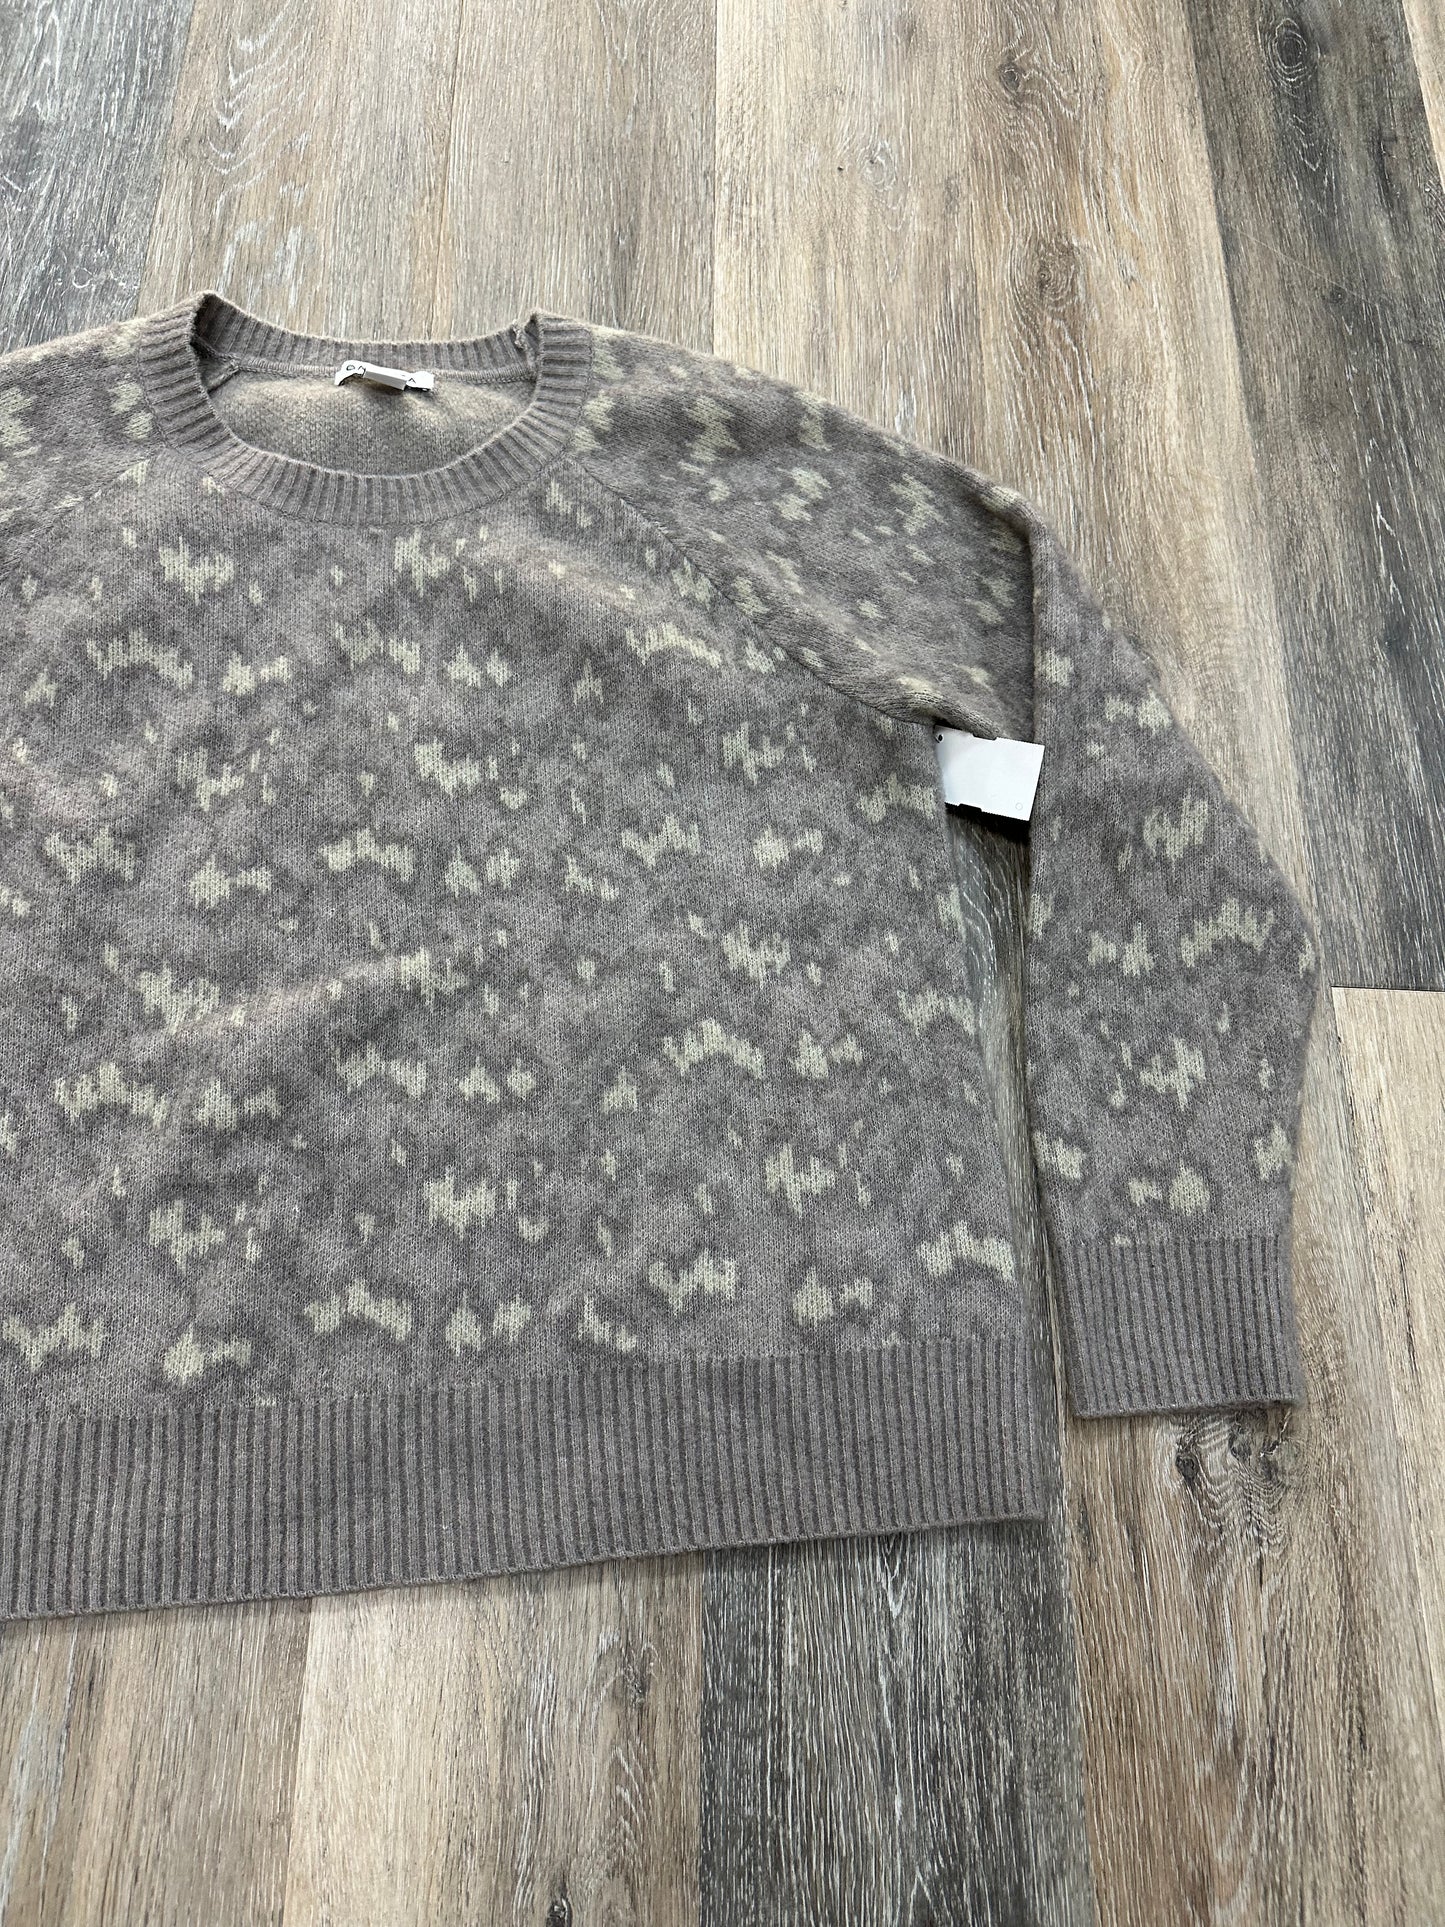 Sweater By Athleta  Size: L